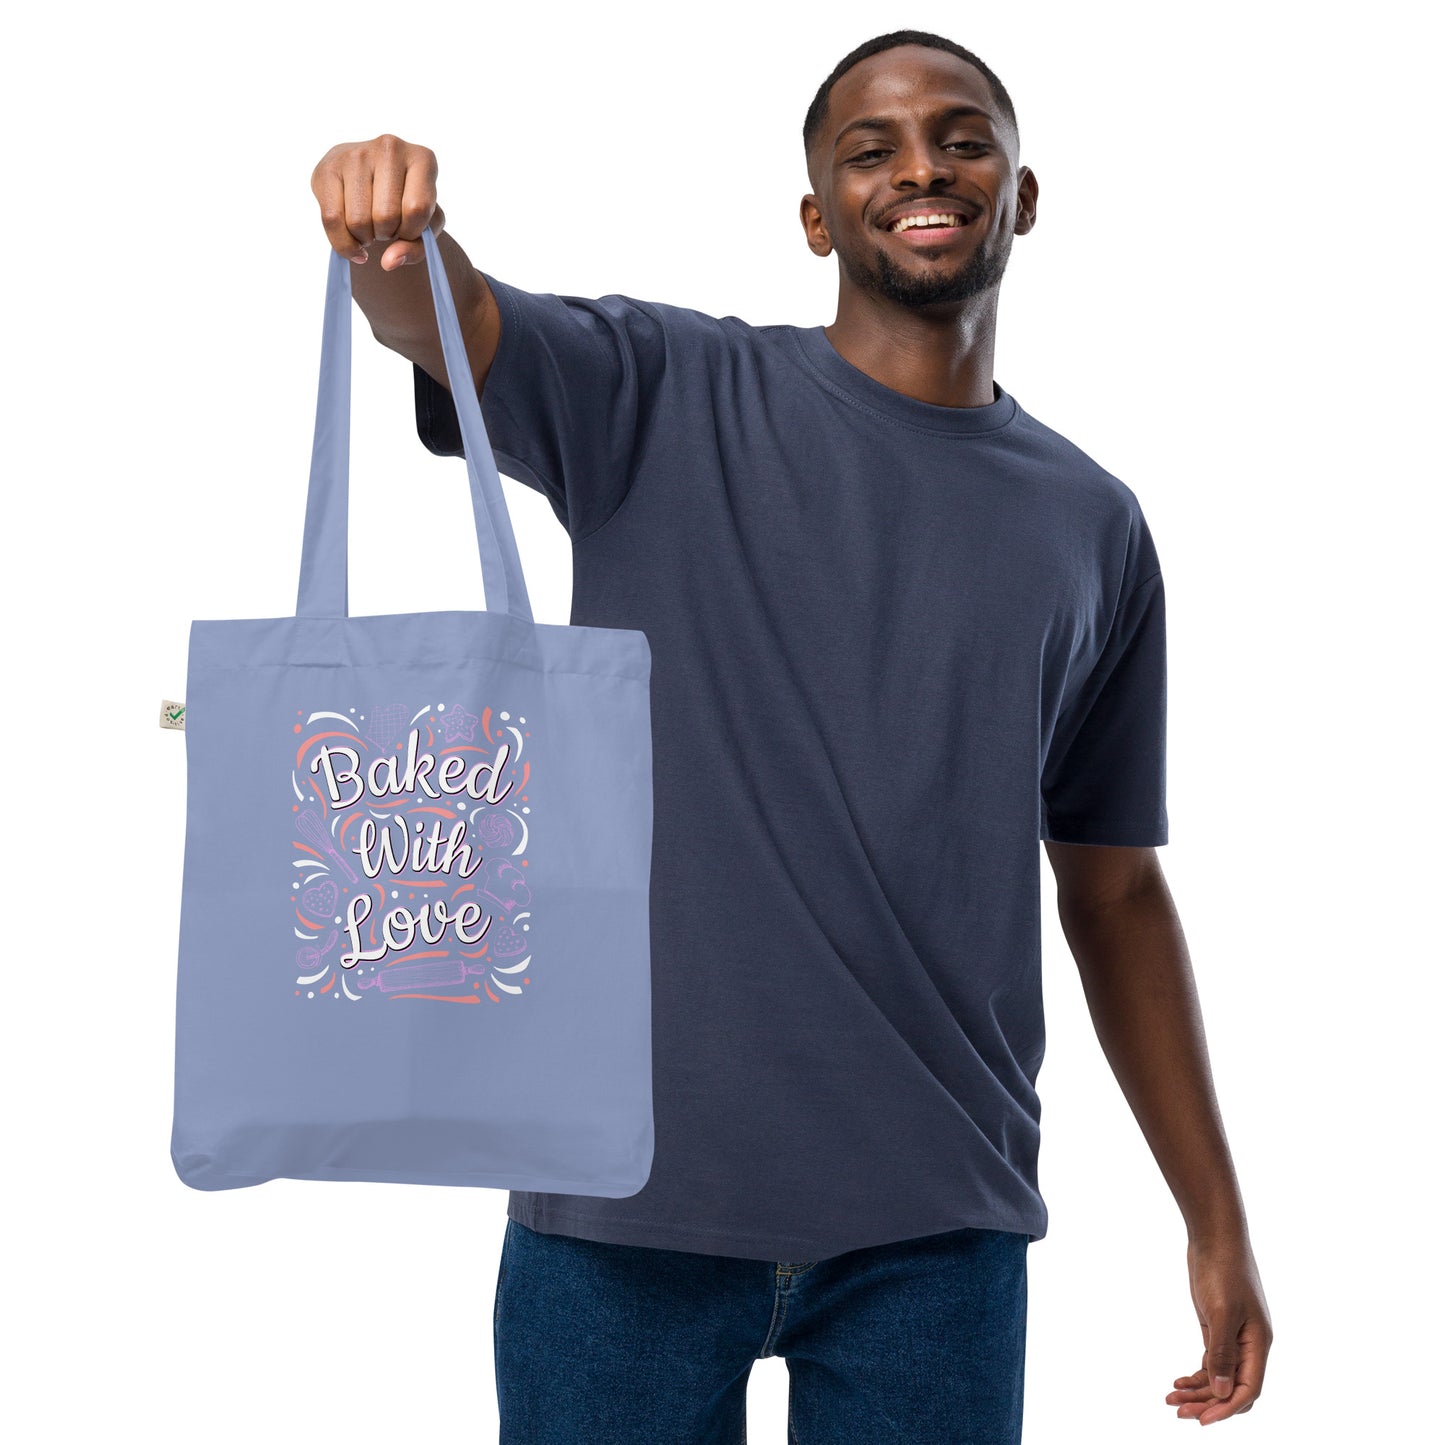 Baked with love - Organic fashion tote bag - HobbyMeFree